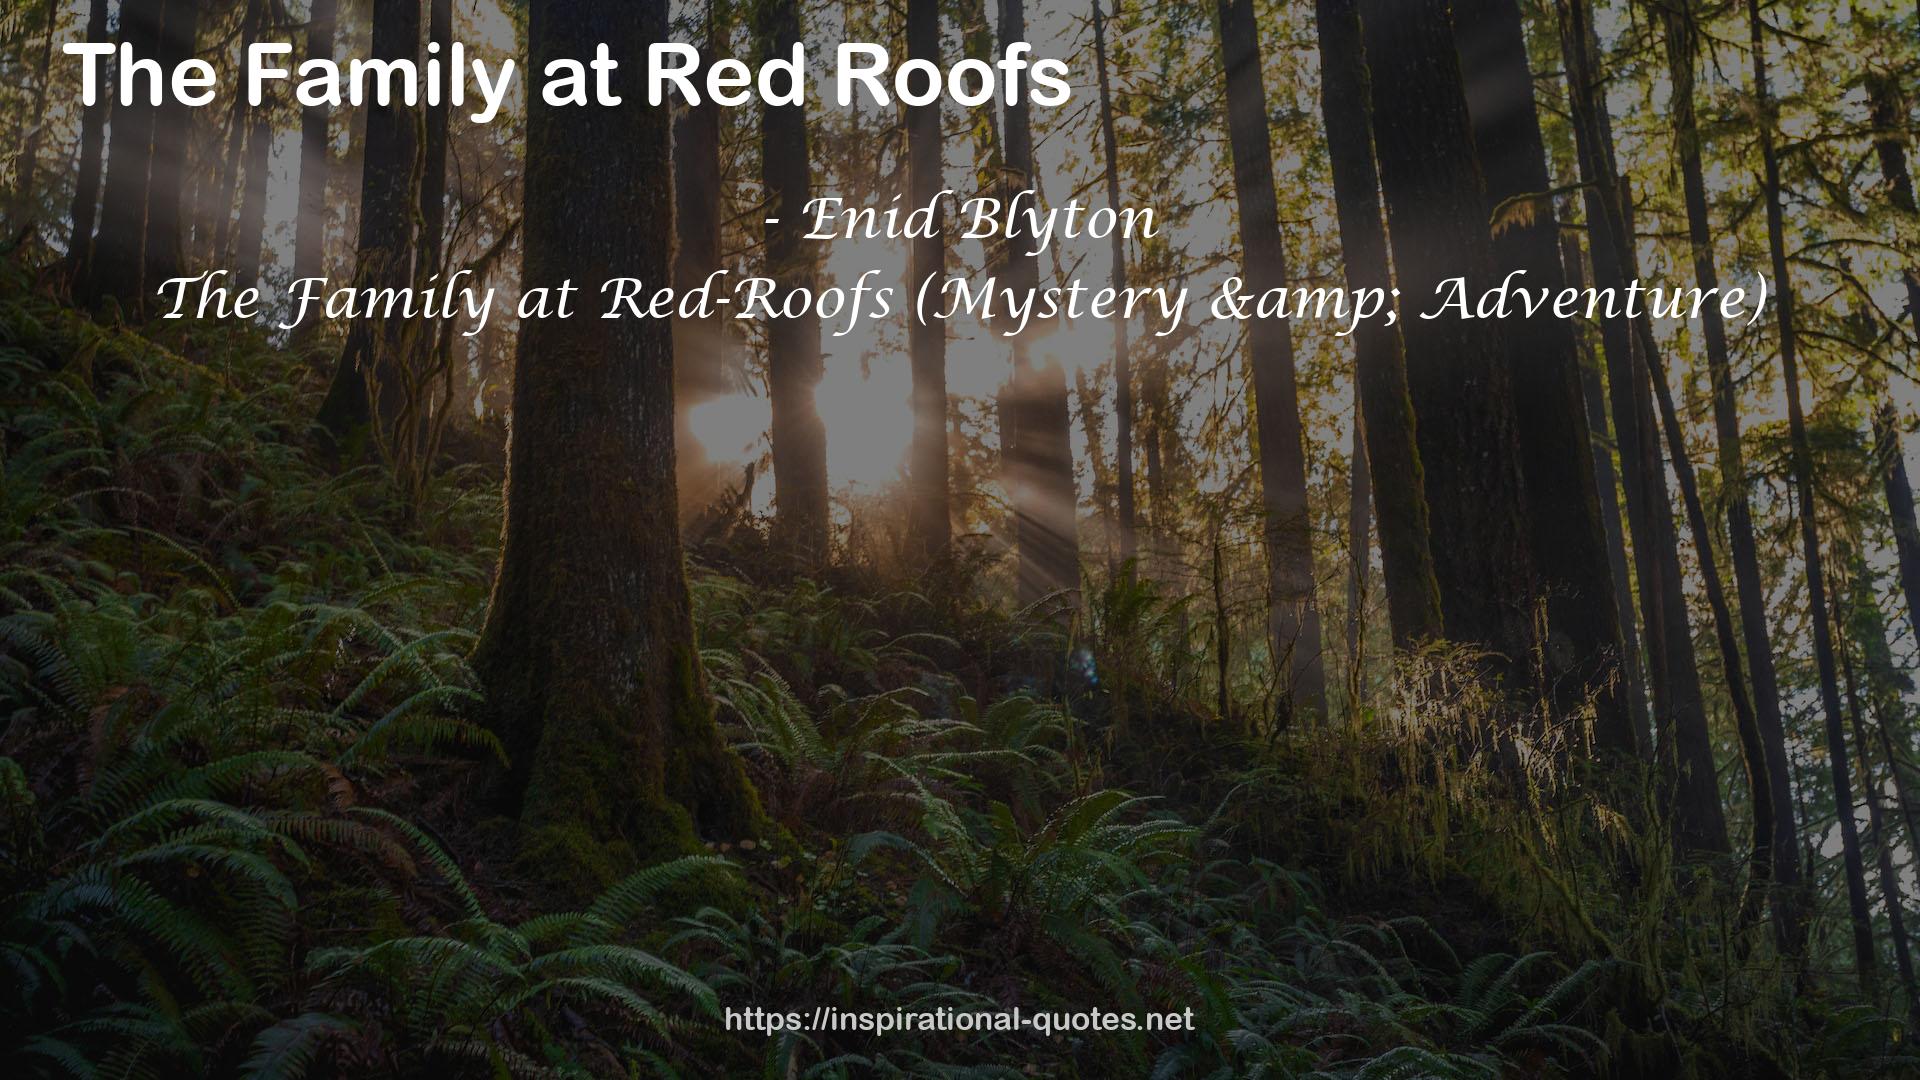 The Family at Red-Roofs (Mystery & Adventure) QUOTES